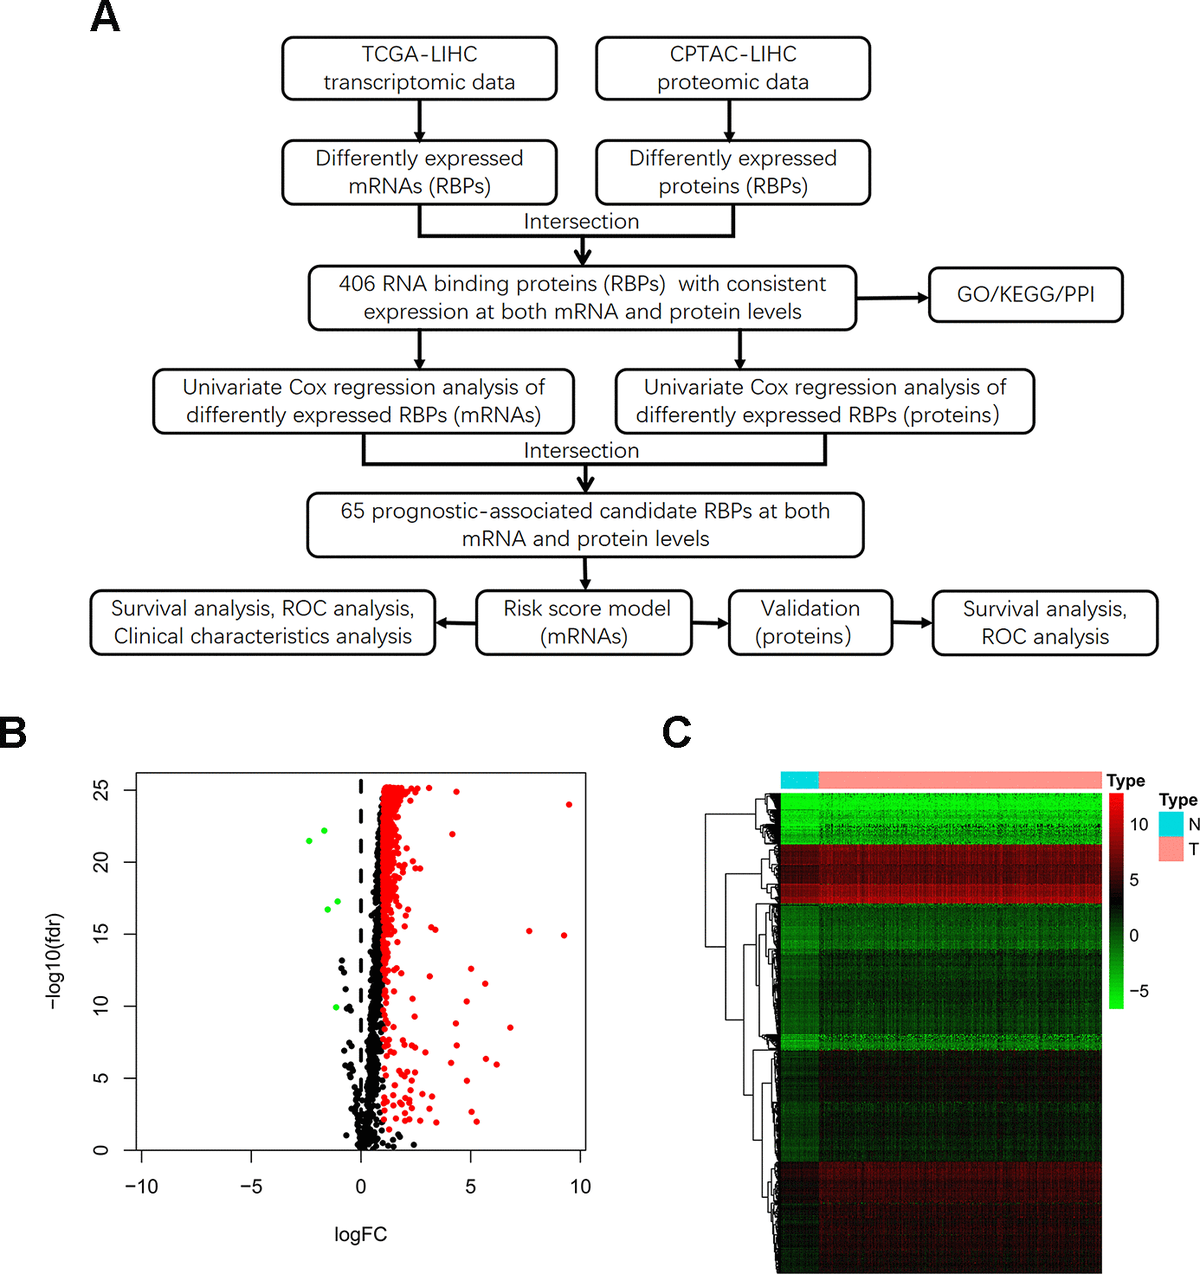 Identification of differentially expressed RBPs between HCC tumor and normal tissues. (A) Flow chart for analysis of RBPs in HCC. (B) Volcano plot for RBPs. Red indicates high expression while green indicates low expression. Black indicates genes that had no differences between HCC tumor and normal tissues. (C) Hierarchical clustering analysis of differentially expressed RBPs. The columns indicate samples and the rows are RBPs. Blue represents downregulation while red represents upregulation.